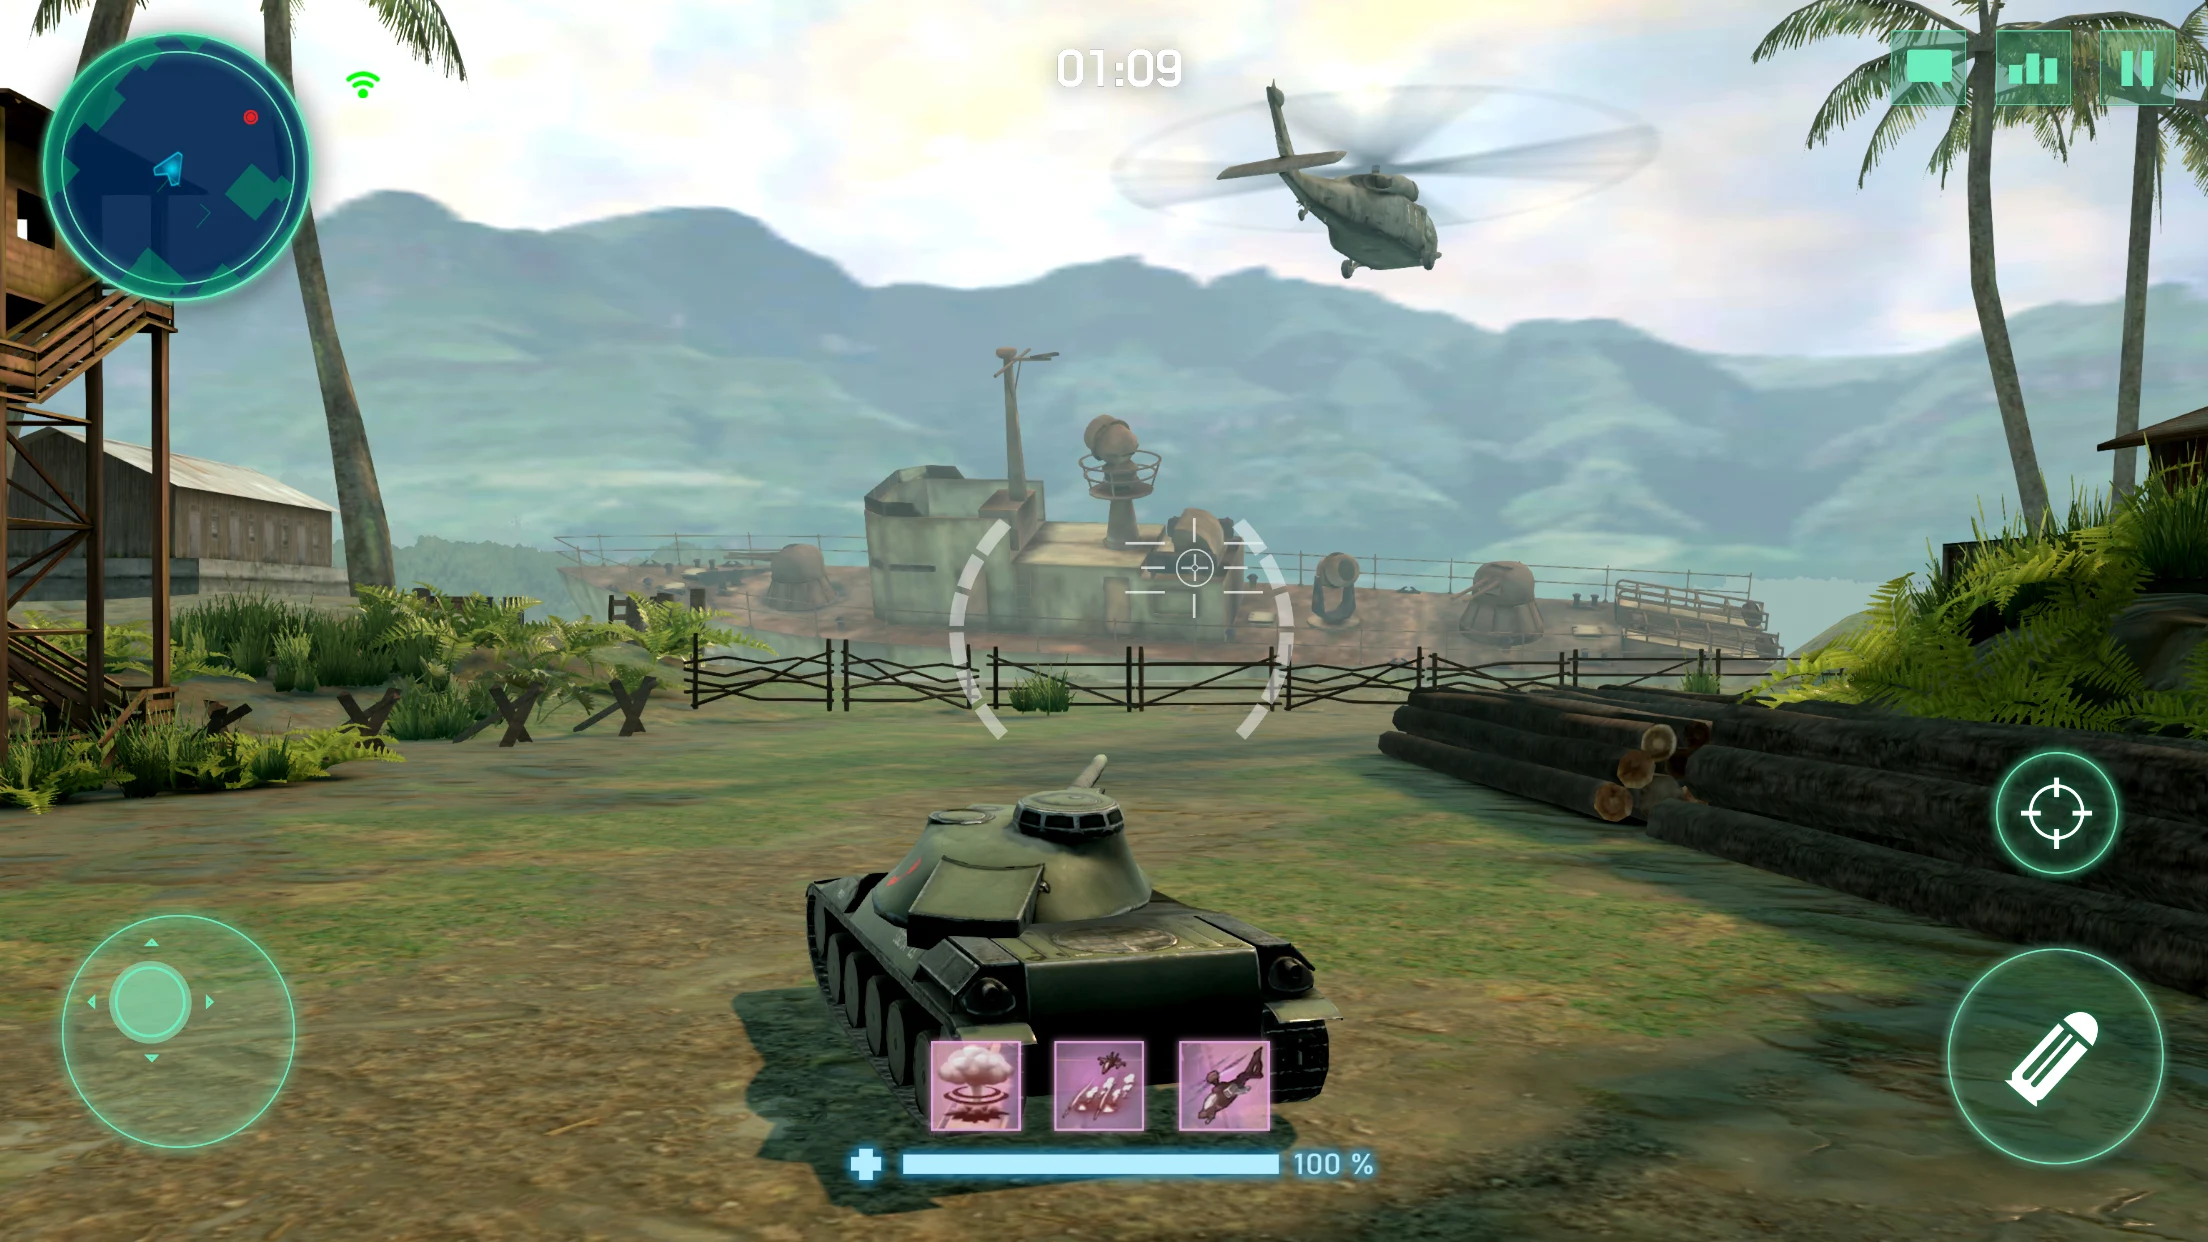 An exciting war tank battle simulation game